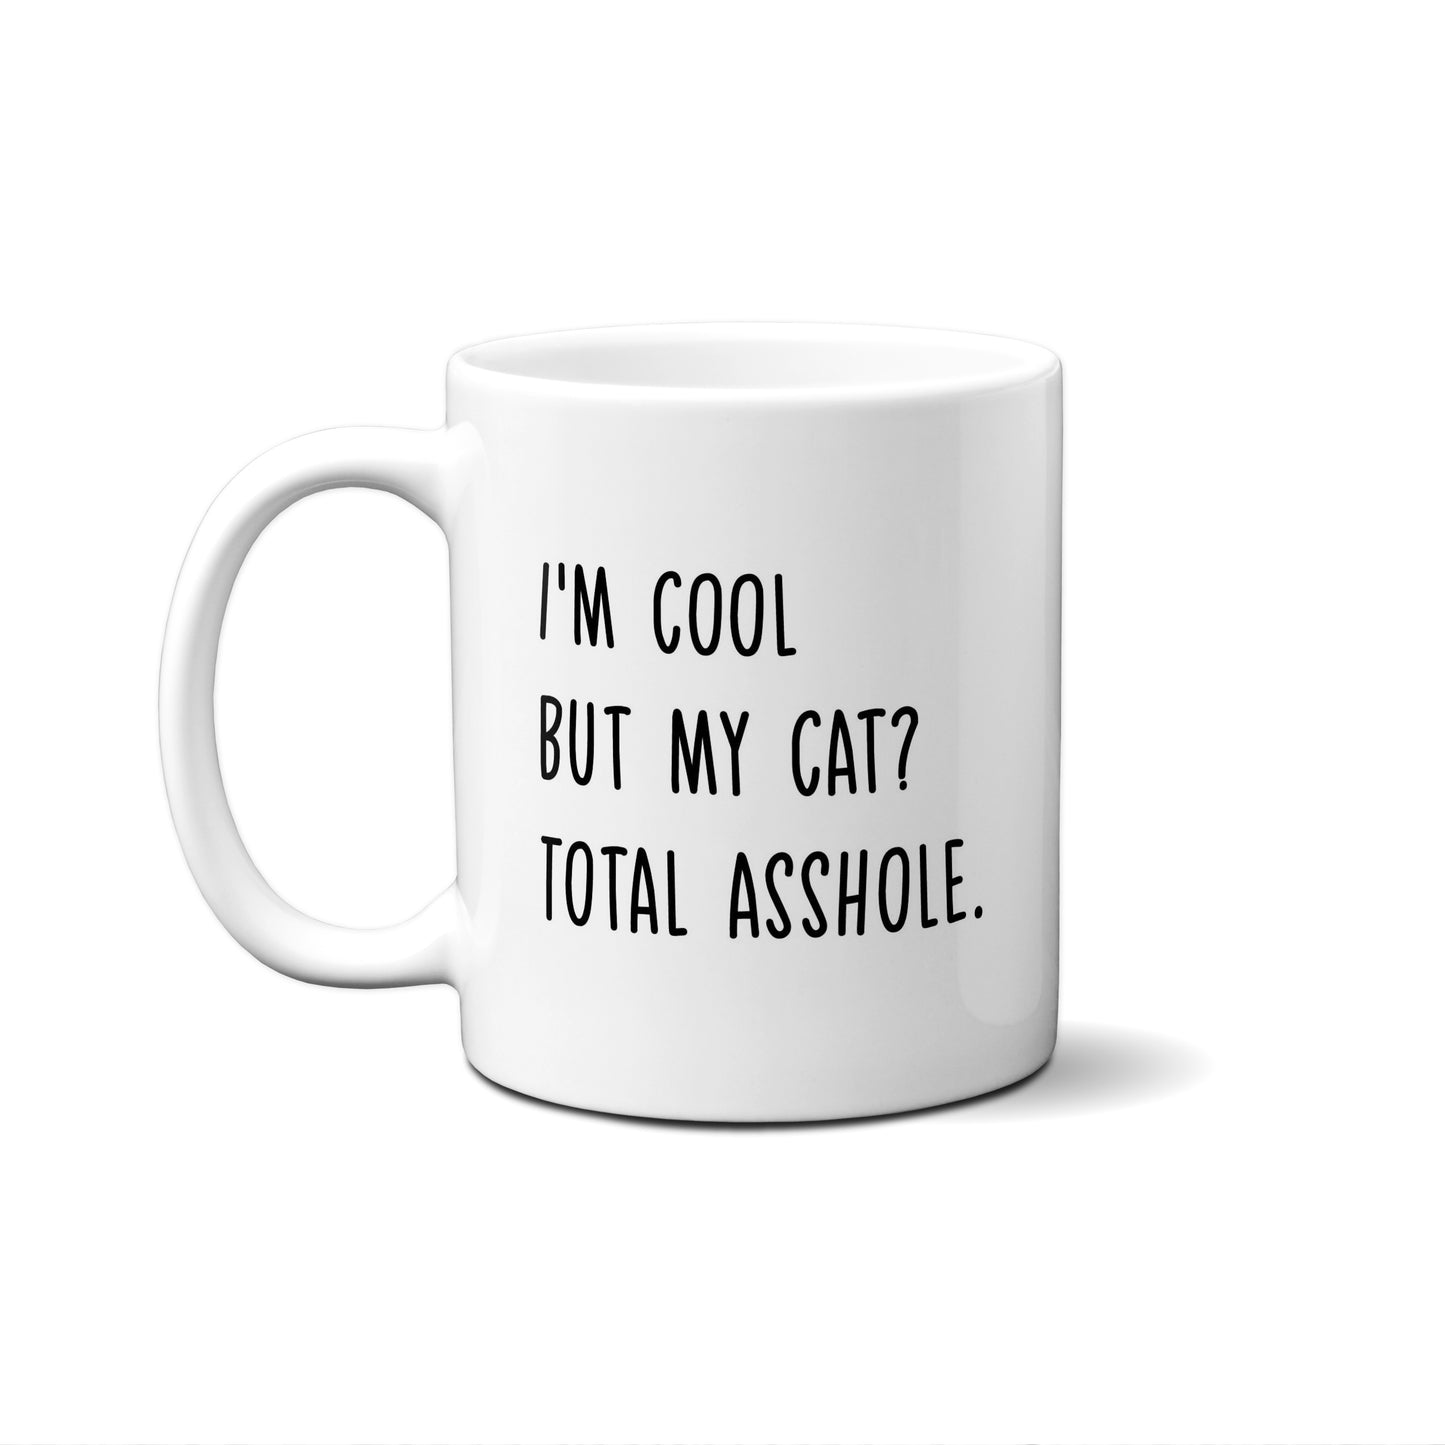 I'm Cool But My Cat? Total Asshole Quote Mug